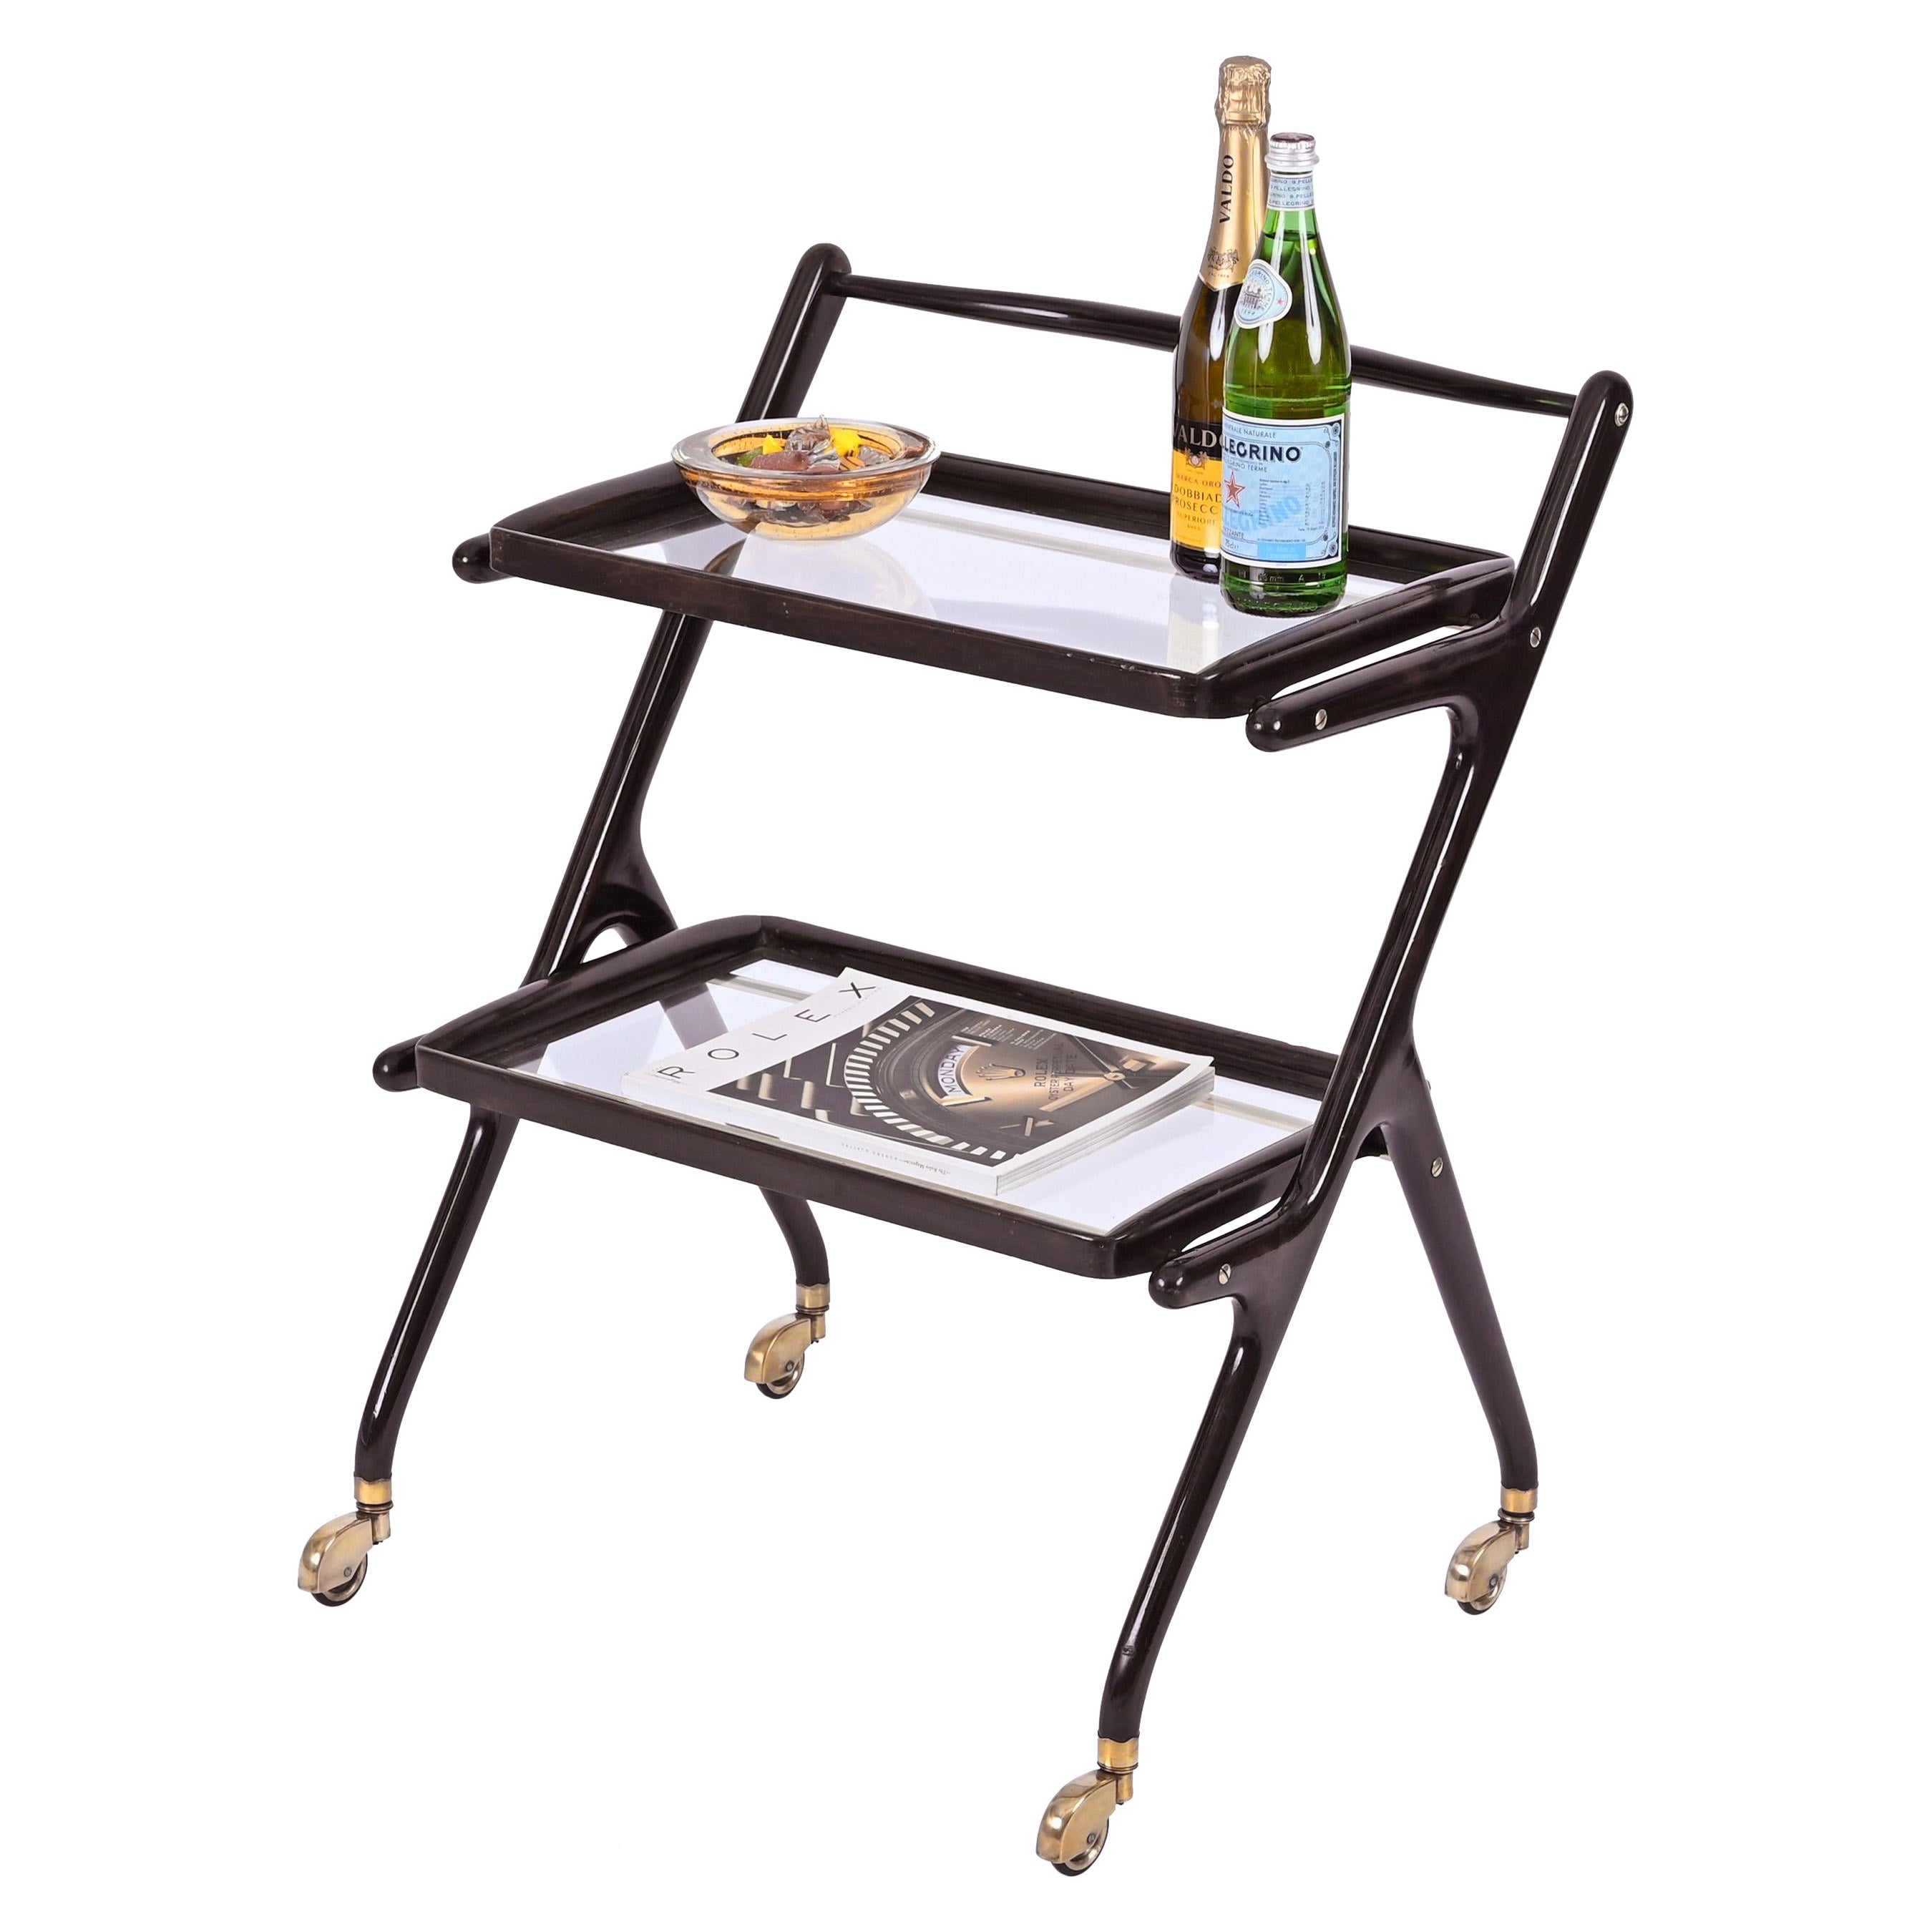 Cesare Lacca Midcentury Wood and Glass Italian Trolley Bar Cart, 1950s For Sale